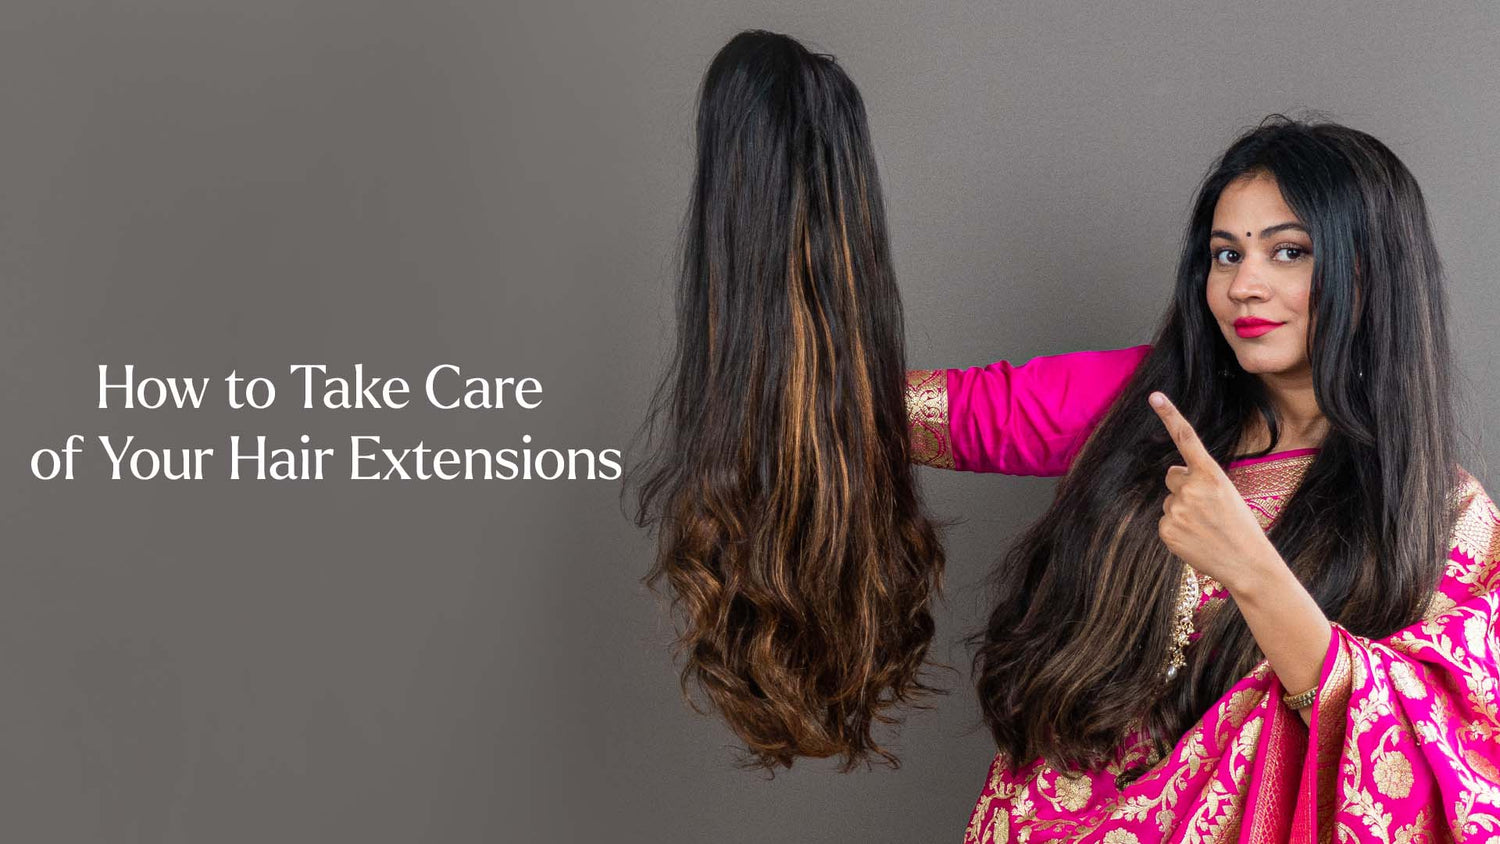 Hair Care: Tips and Tricks for All Hair Types